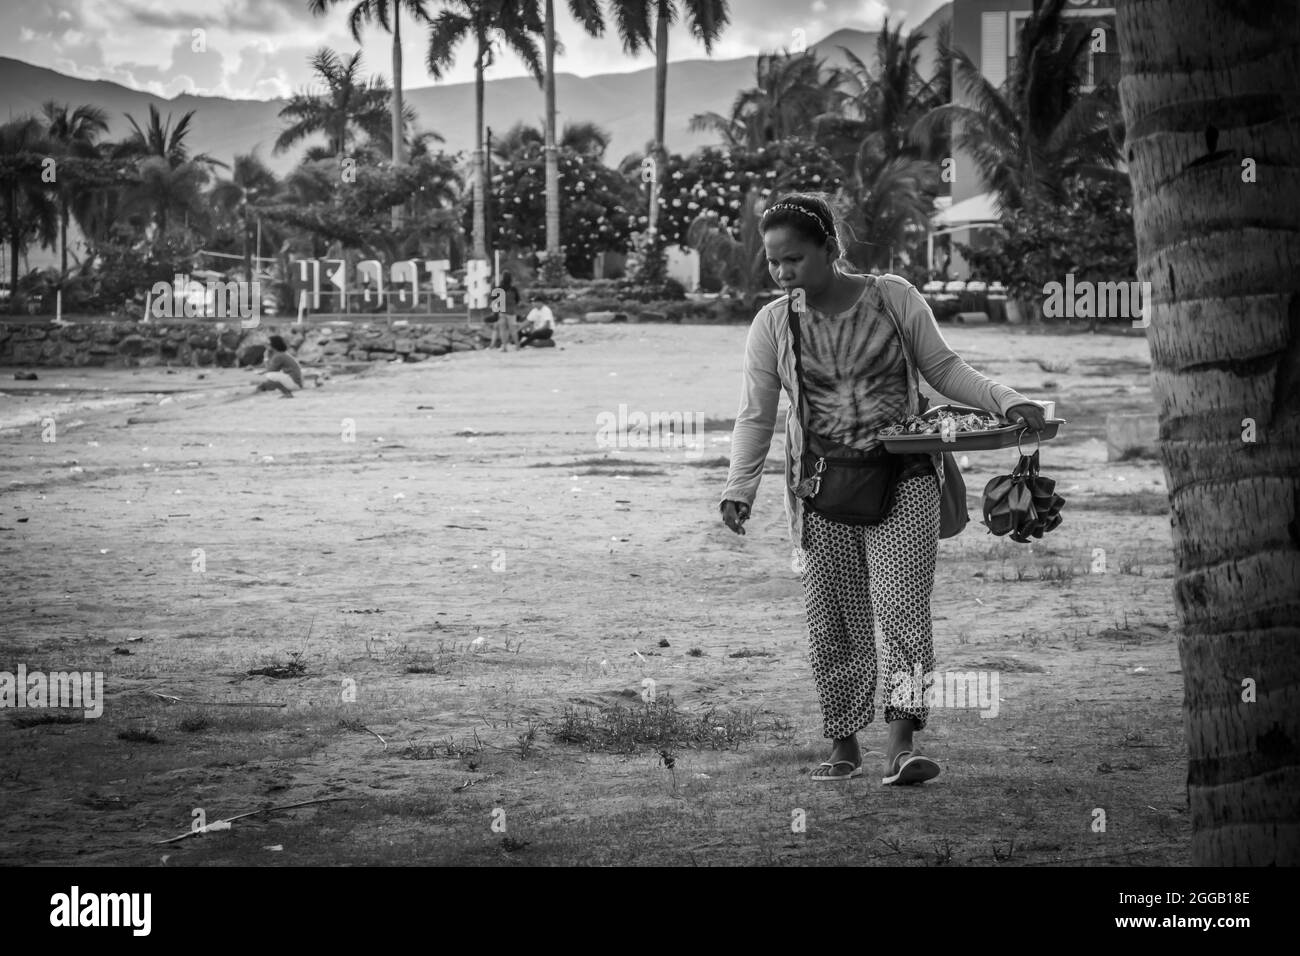 SUBIC, PHILIPPINES - Aug 09, 2017: A grayscale of a female vendor selling souvenirs at the beach of Subic Bay in Olongapo City, Zambales, Philippines Stock Photo